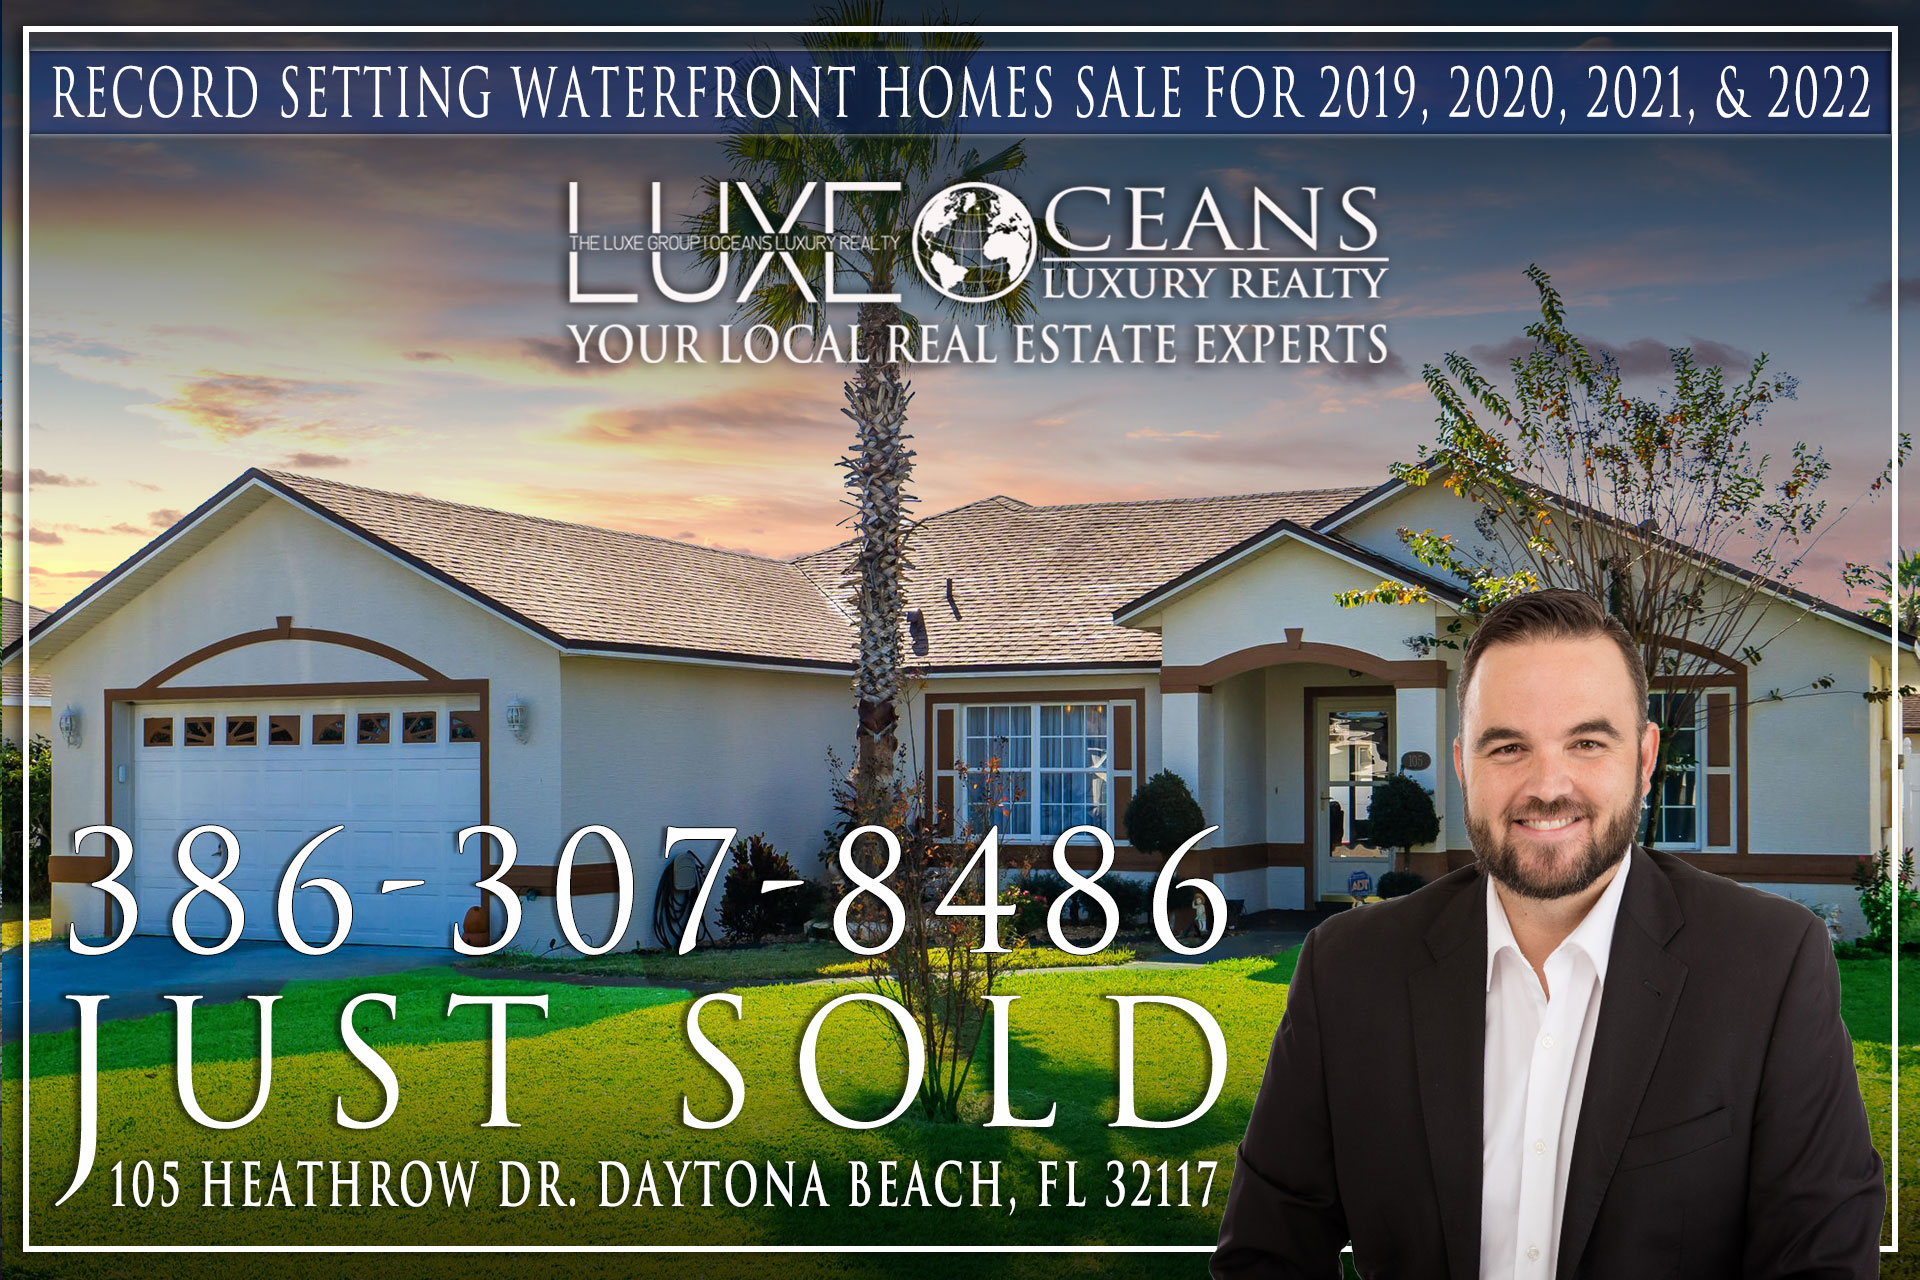 Daytona Beach Real Estate For Sale. SOLD 105 Heathrow Drive Daytona Beach, FL 32117 -  The LUXE Group at Oceans Luxury Realty 386-299-4043